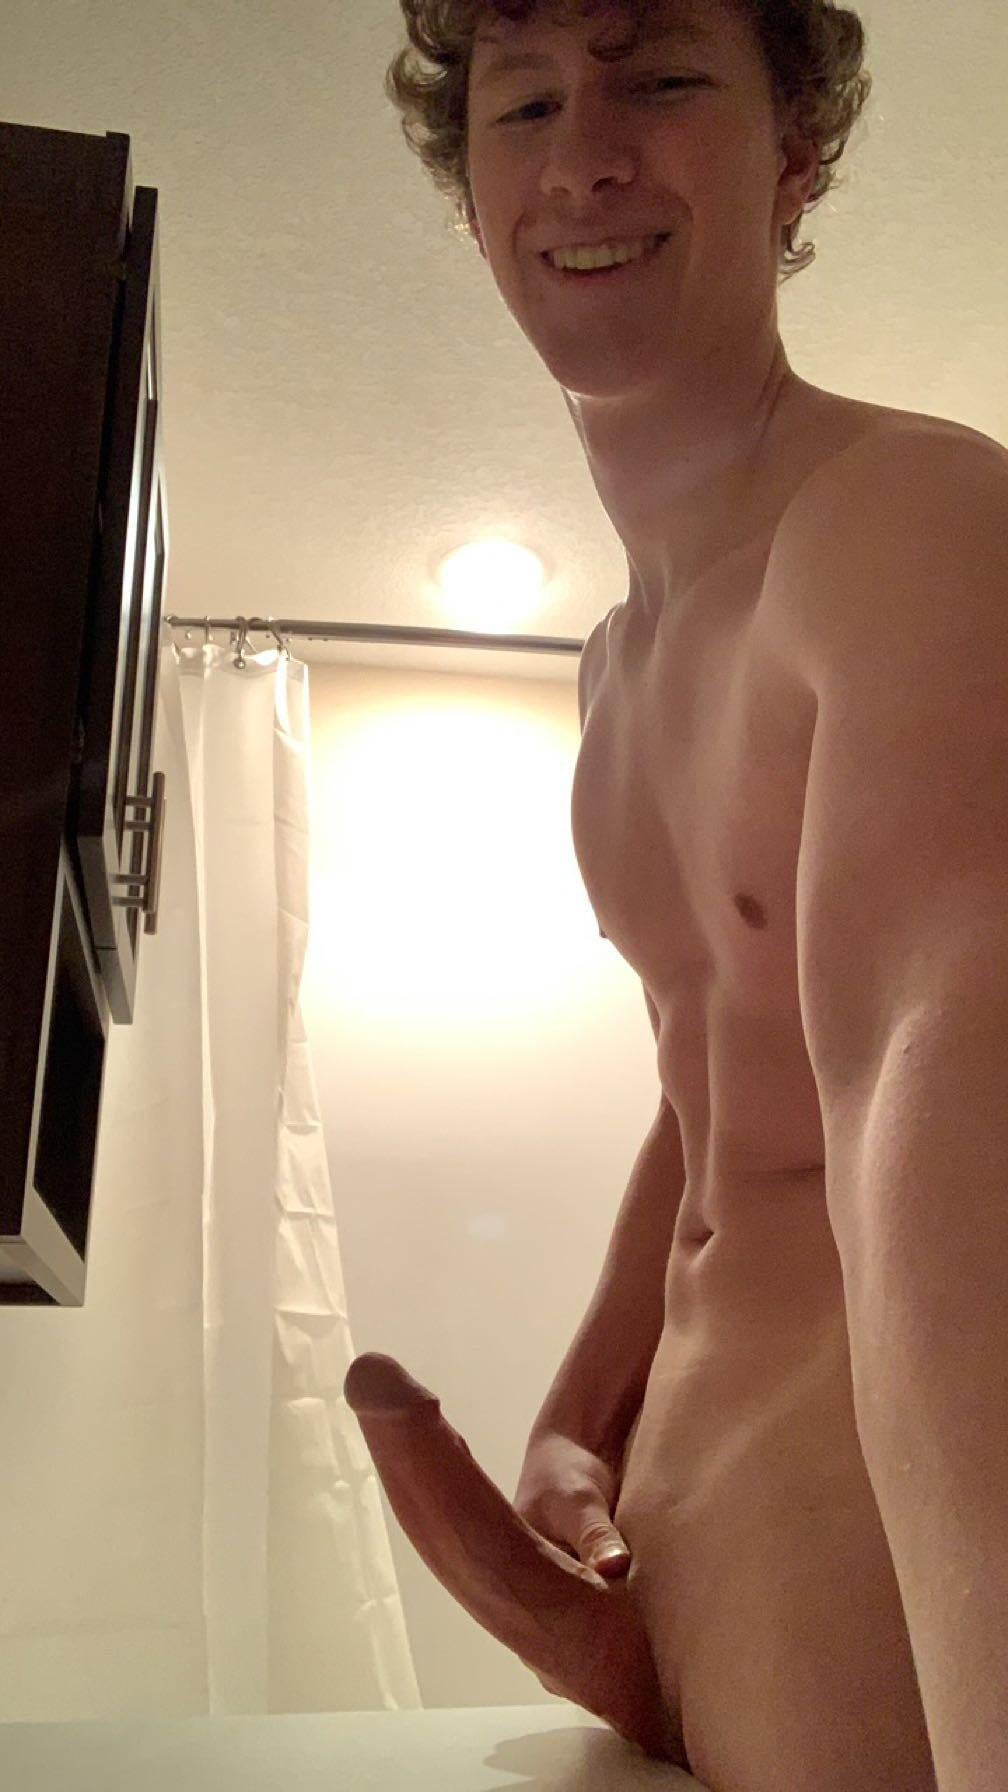 What would you with this freshly shaven cock